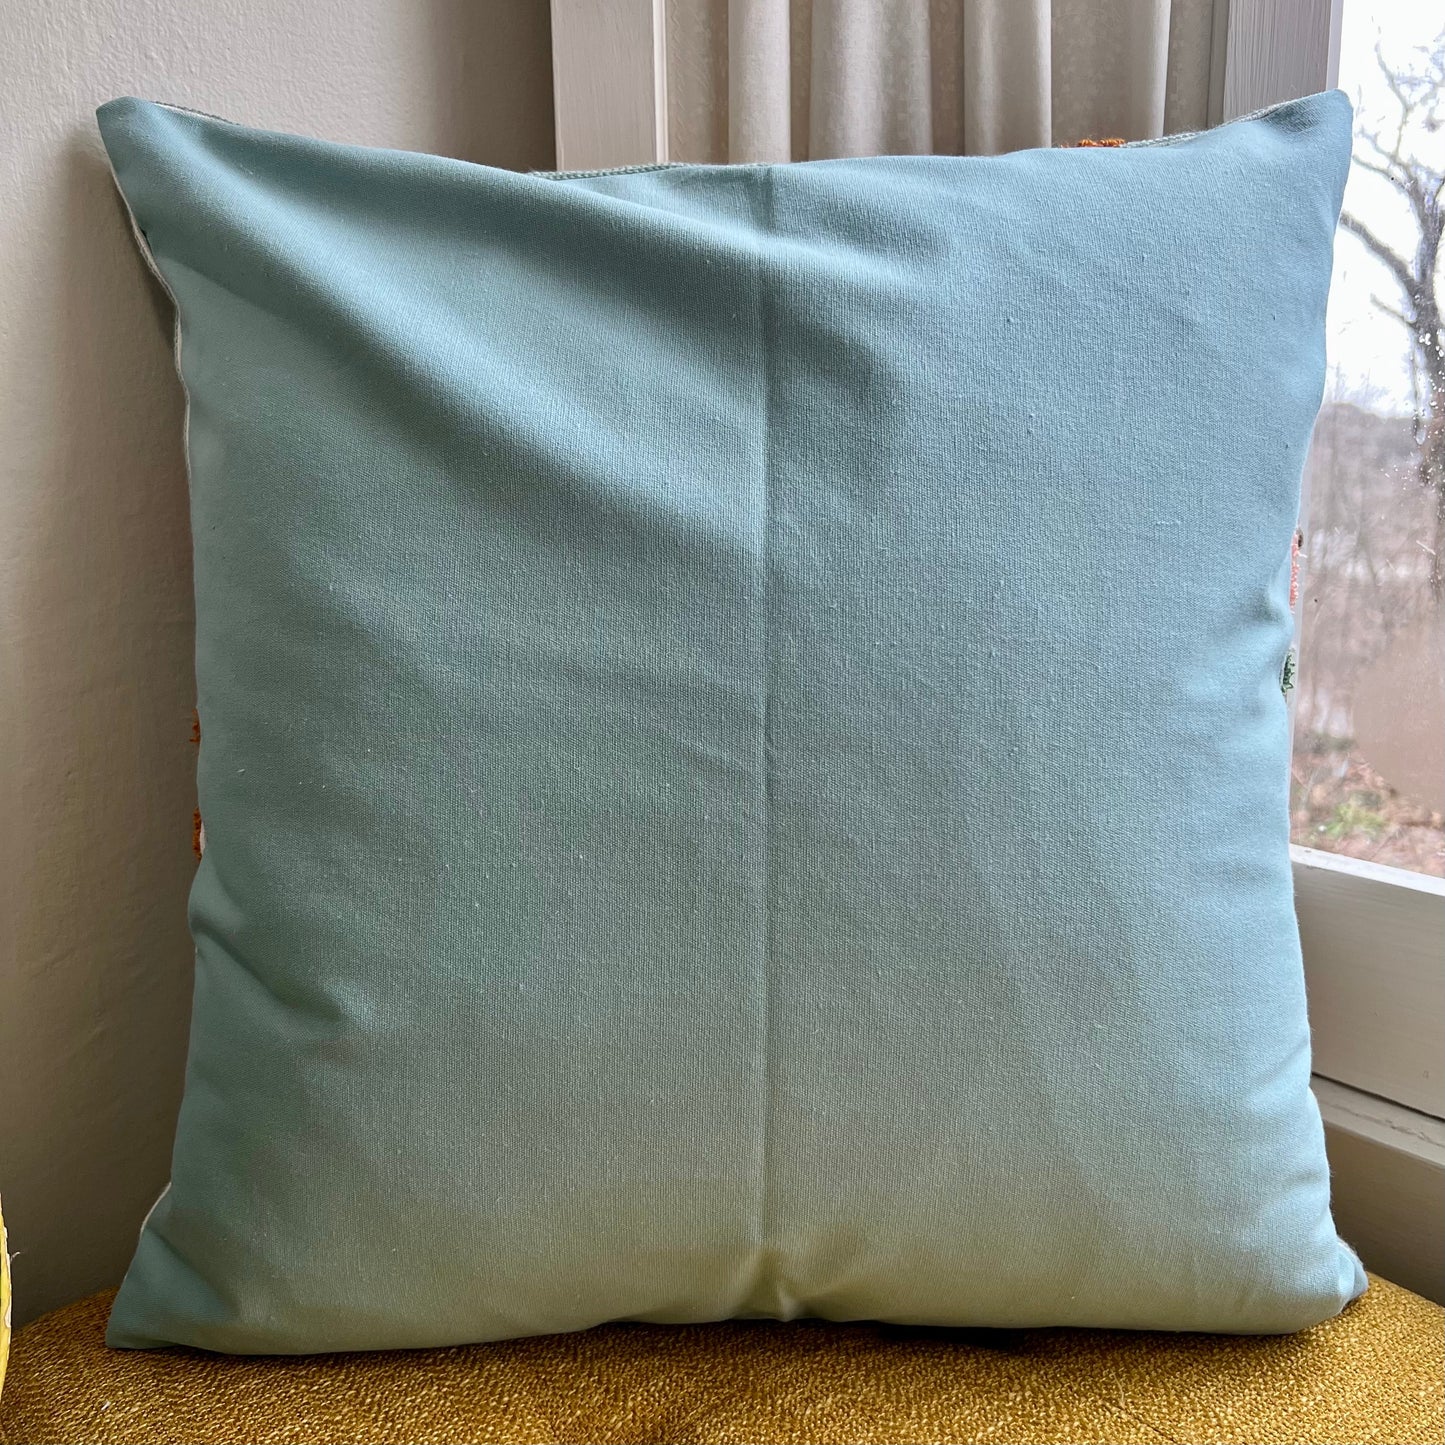 Blue Floral Tufted Embroidered Pillow Cover